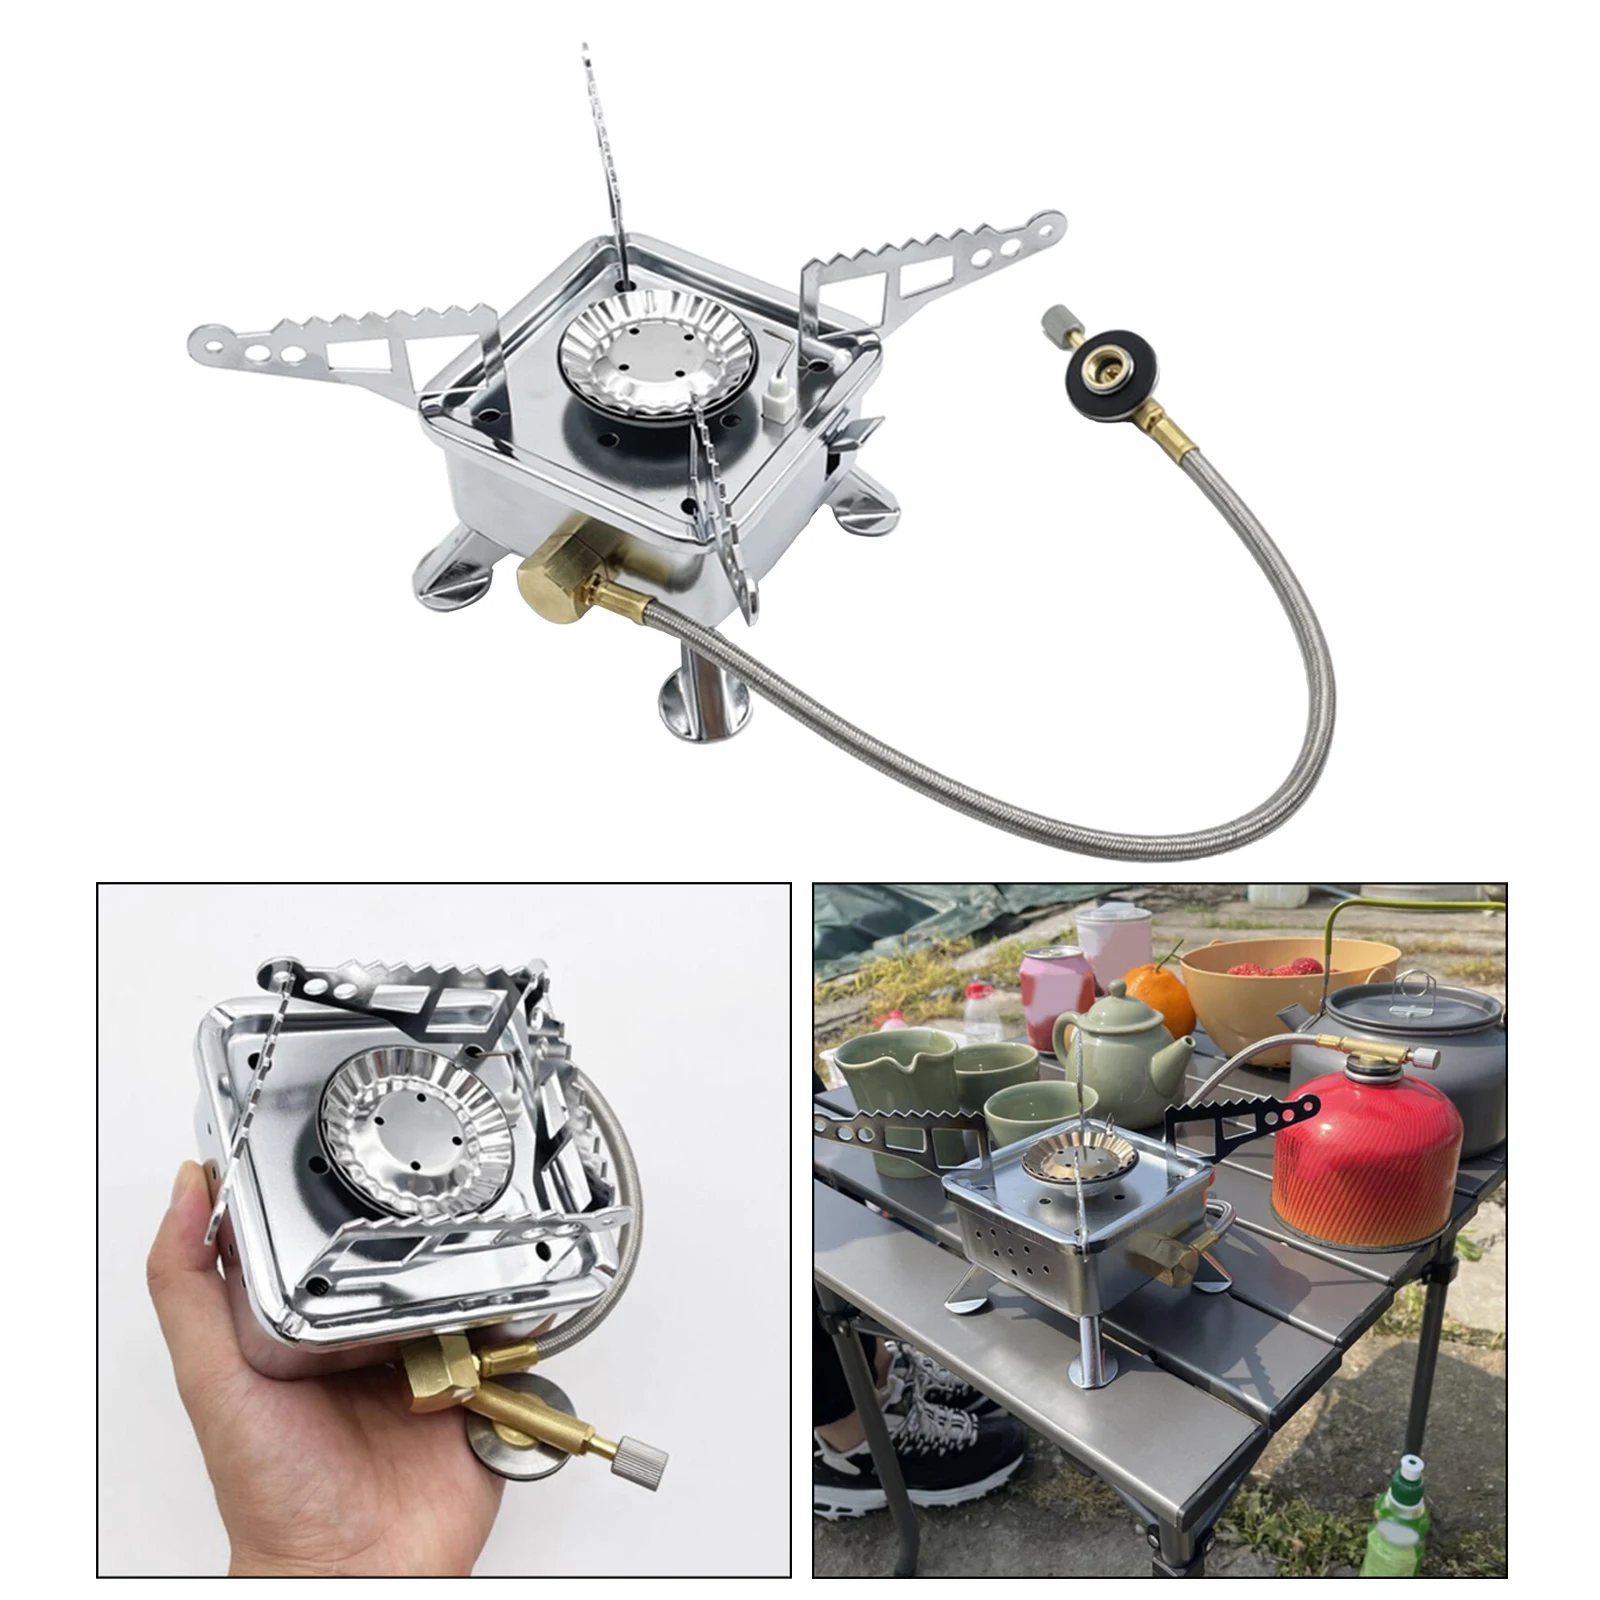 Gas Stove Portable Burner Cooking Picnic Grill MAPP Tank Burning Stoves